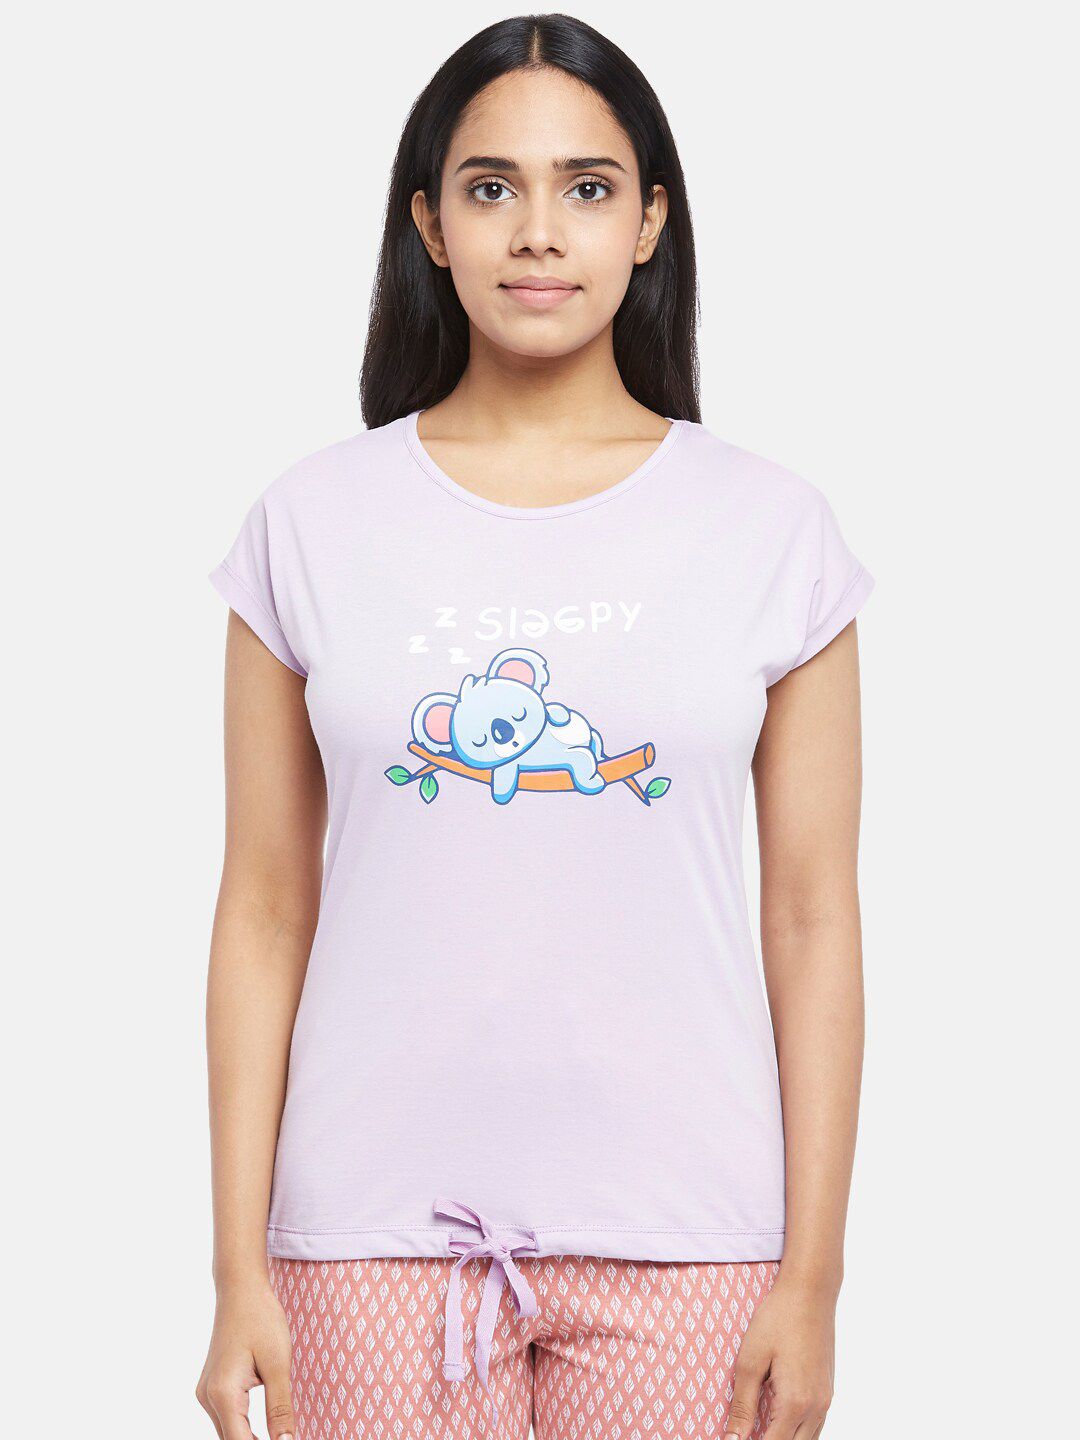 Dreamz by Pantaloons Women Purple Graphic Printed Lounge T-shirt Price in India